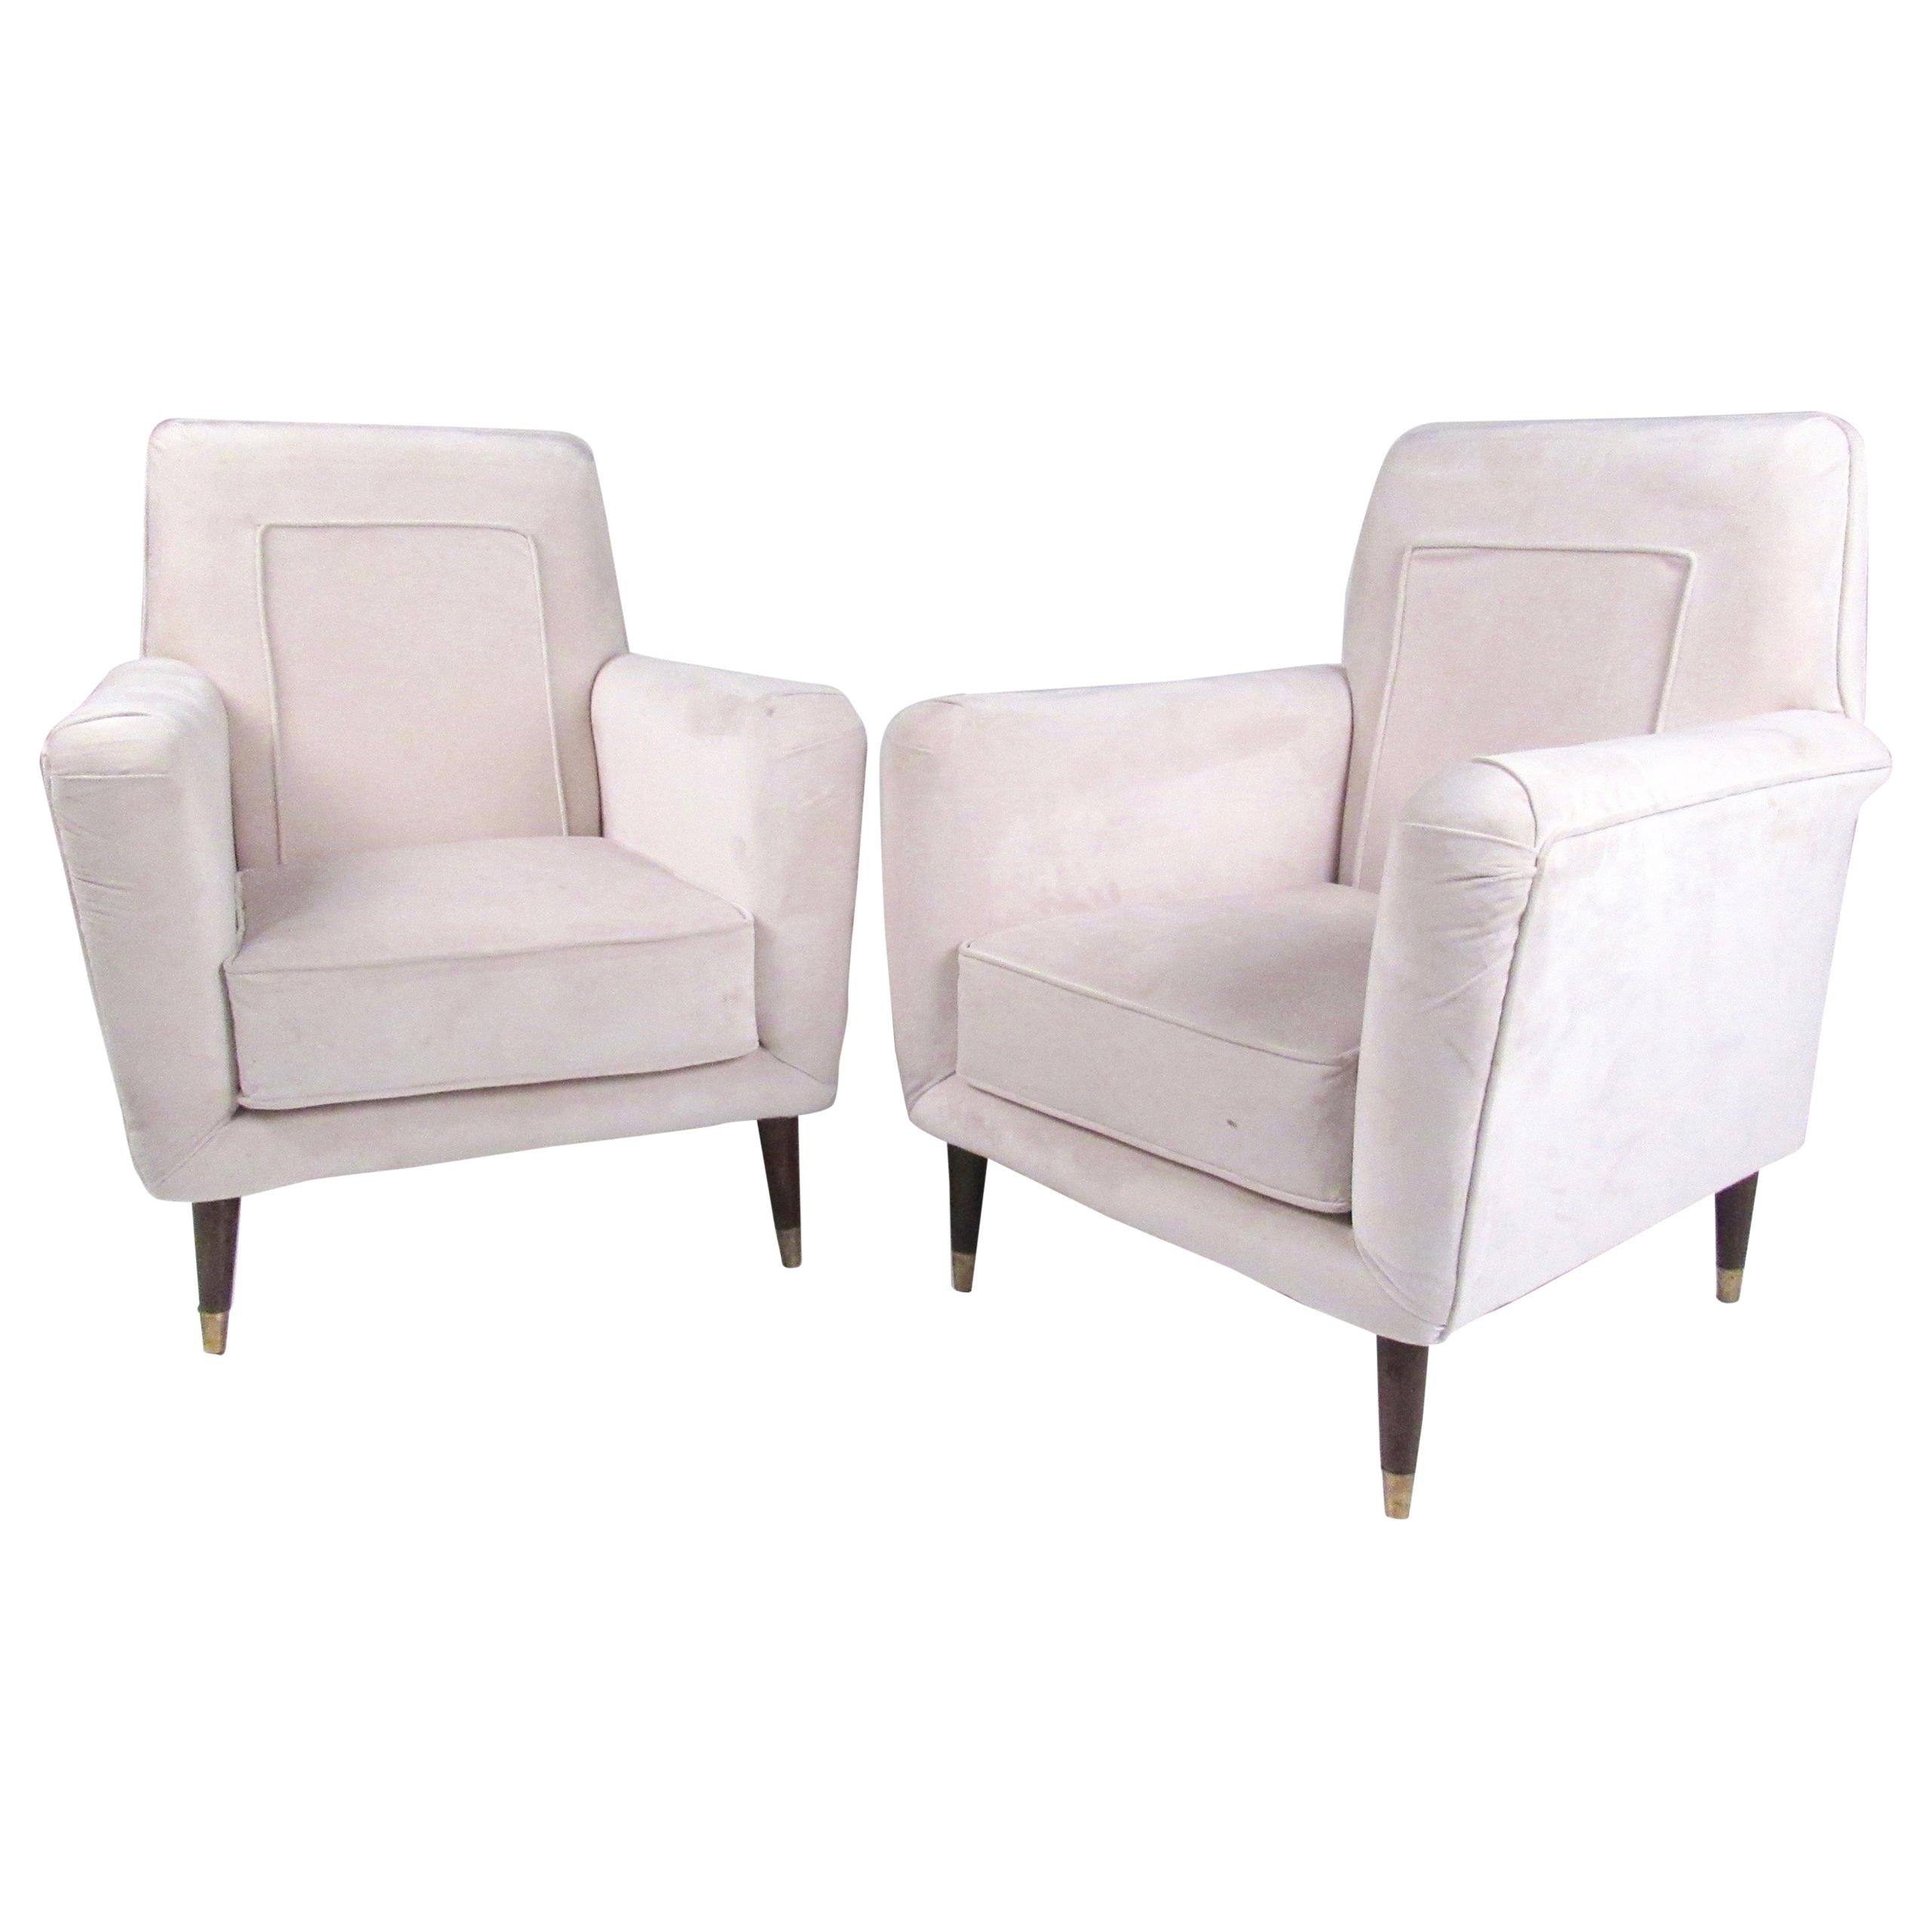 Pair of Italian Modern Upholstered Armchairs 